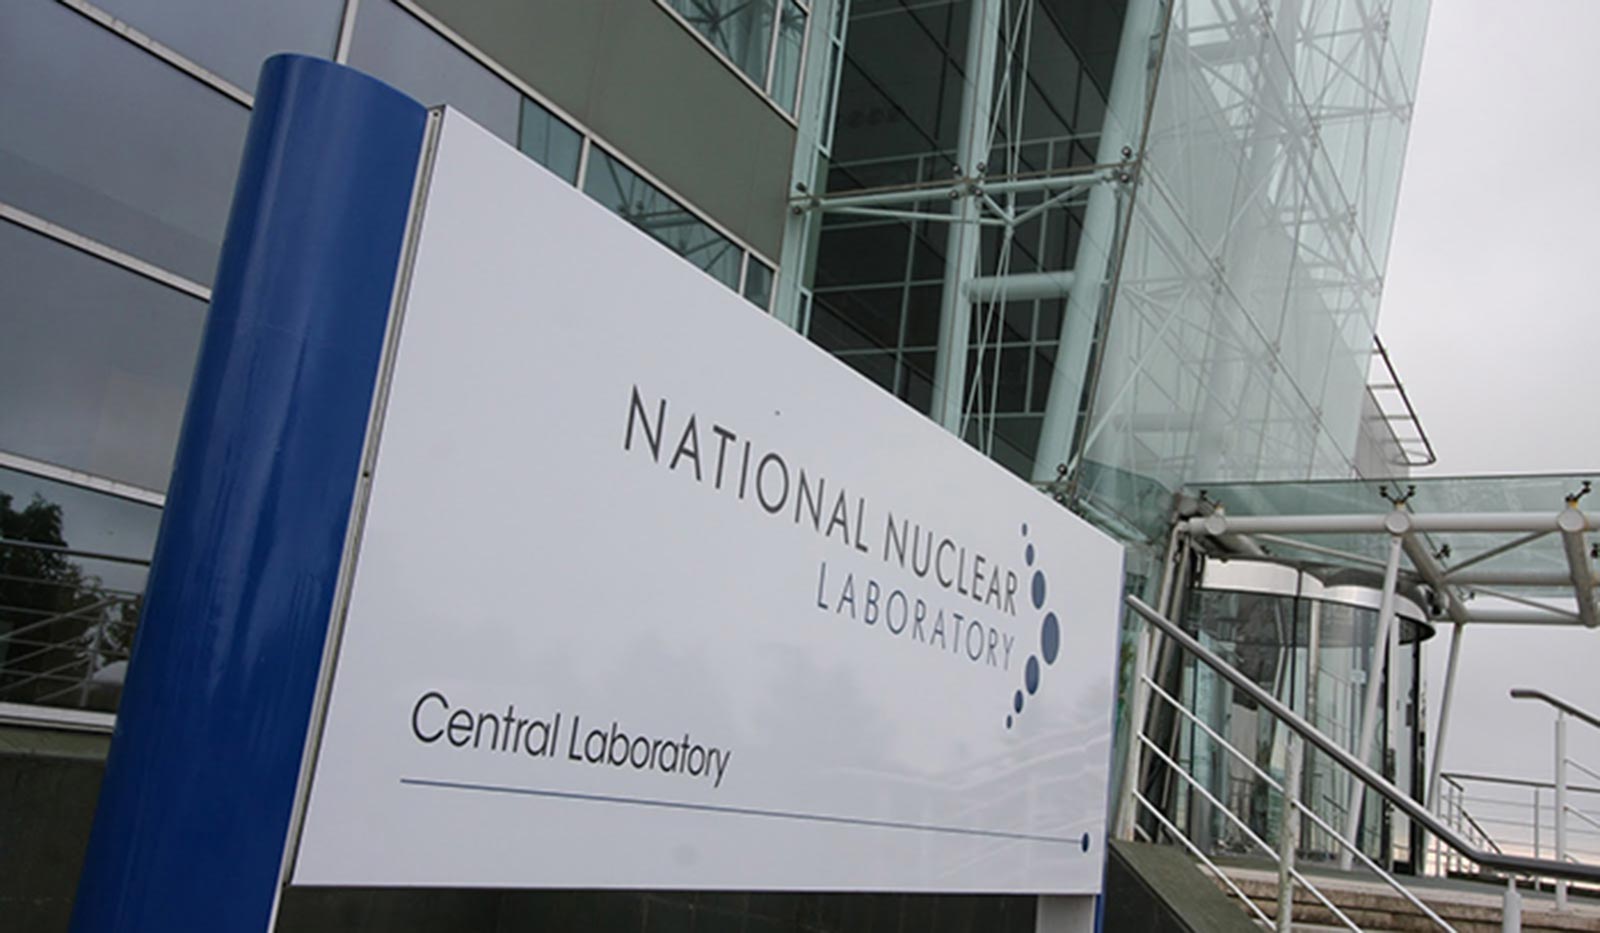 Central Lab National Nuclear Laboratory